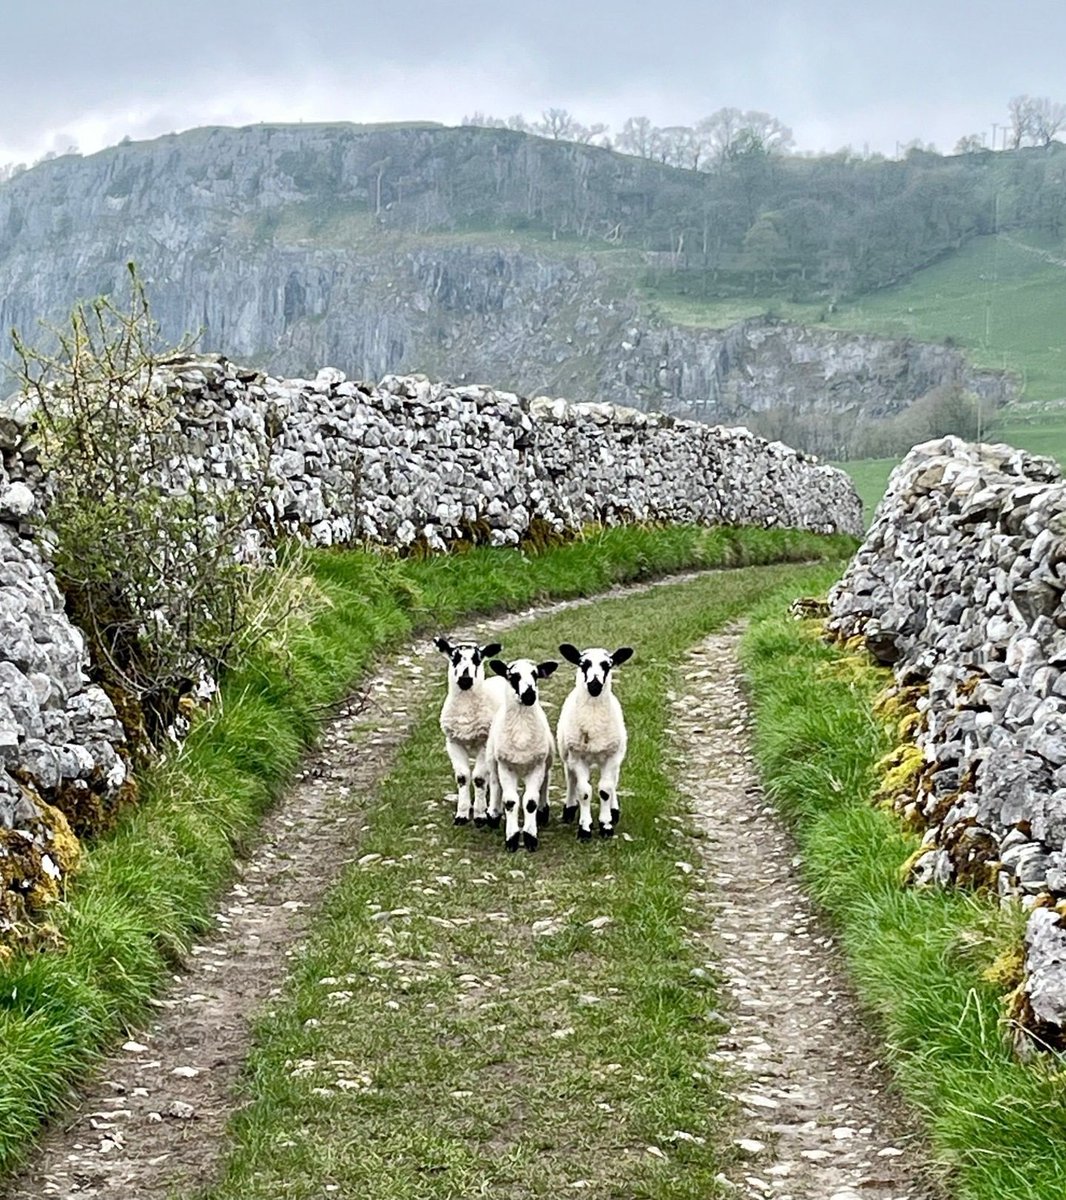 Wool grows naturally on sheep year on year, it is a keratin protein fibre, similar to human hair and is 100% natural and not man-made. Sheep will produce a new fleece every year, making wool a renewable fibre source. 📸 by Mark Corner @yorkshire_dales